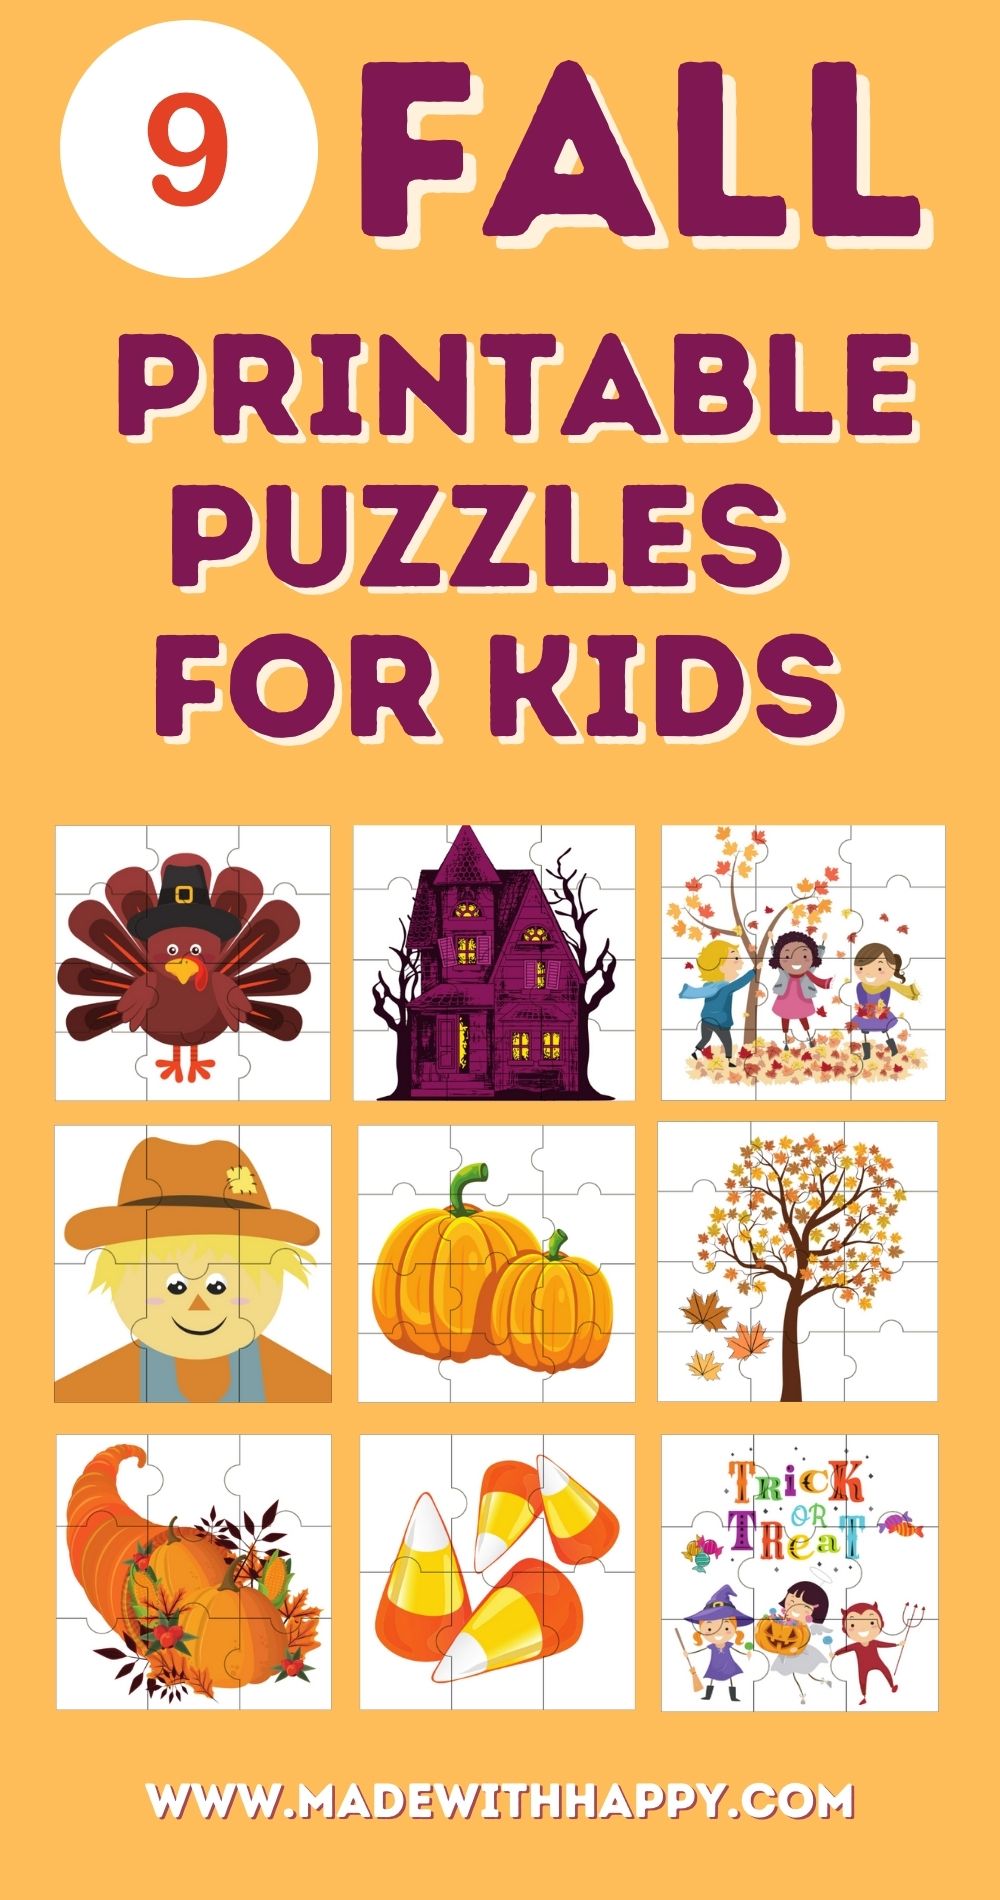 Printable Fall Puzzles